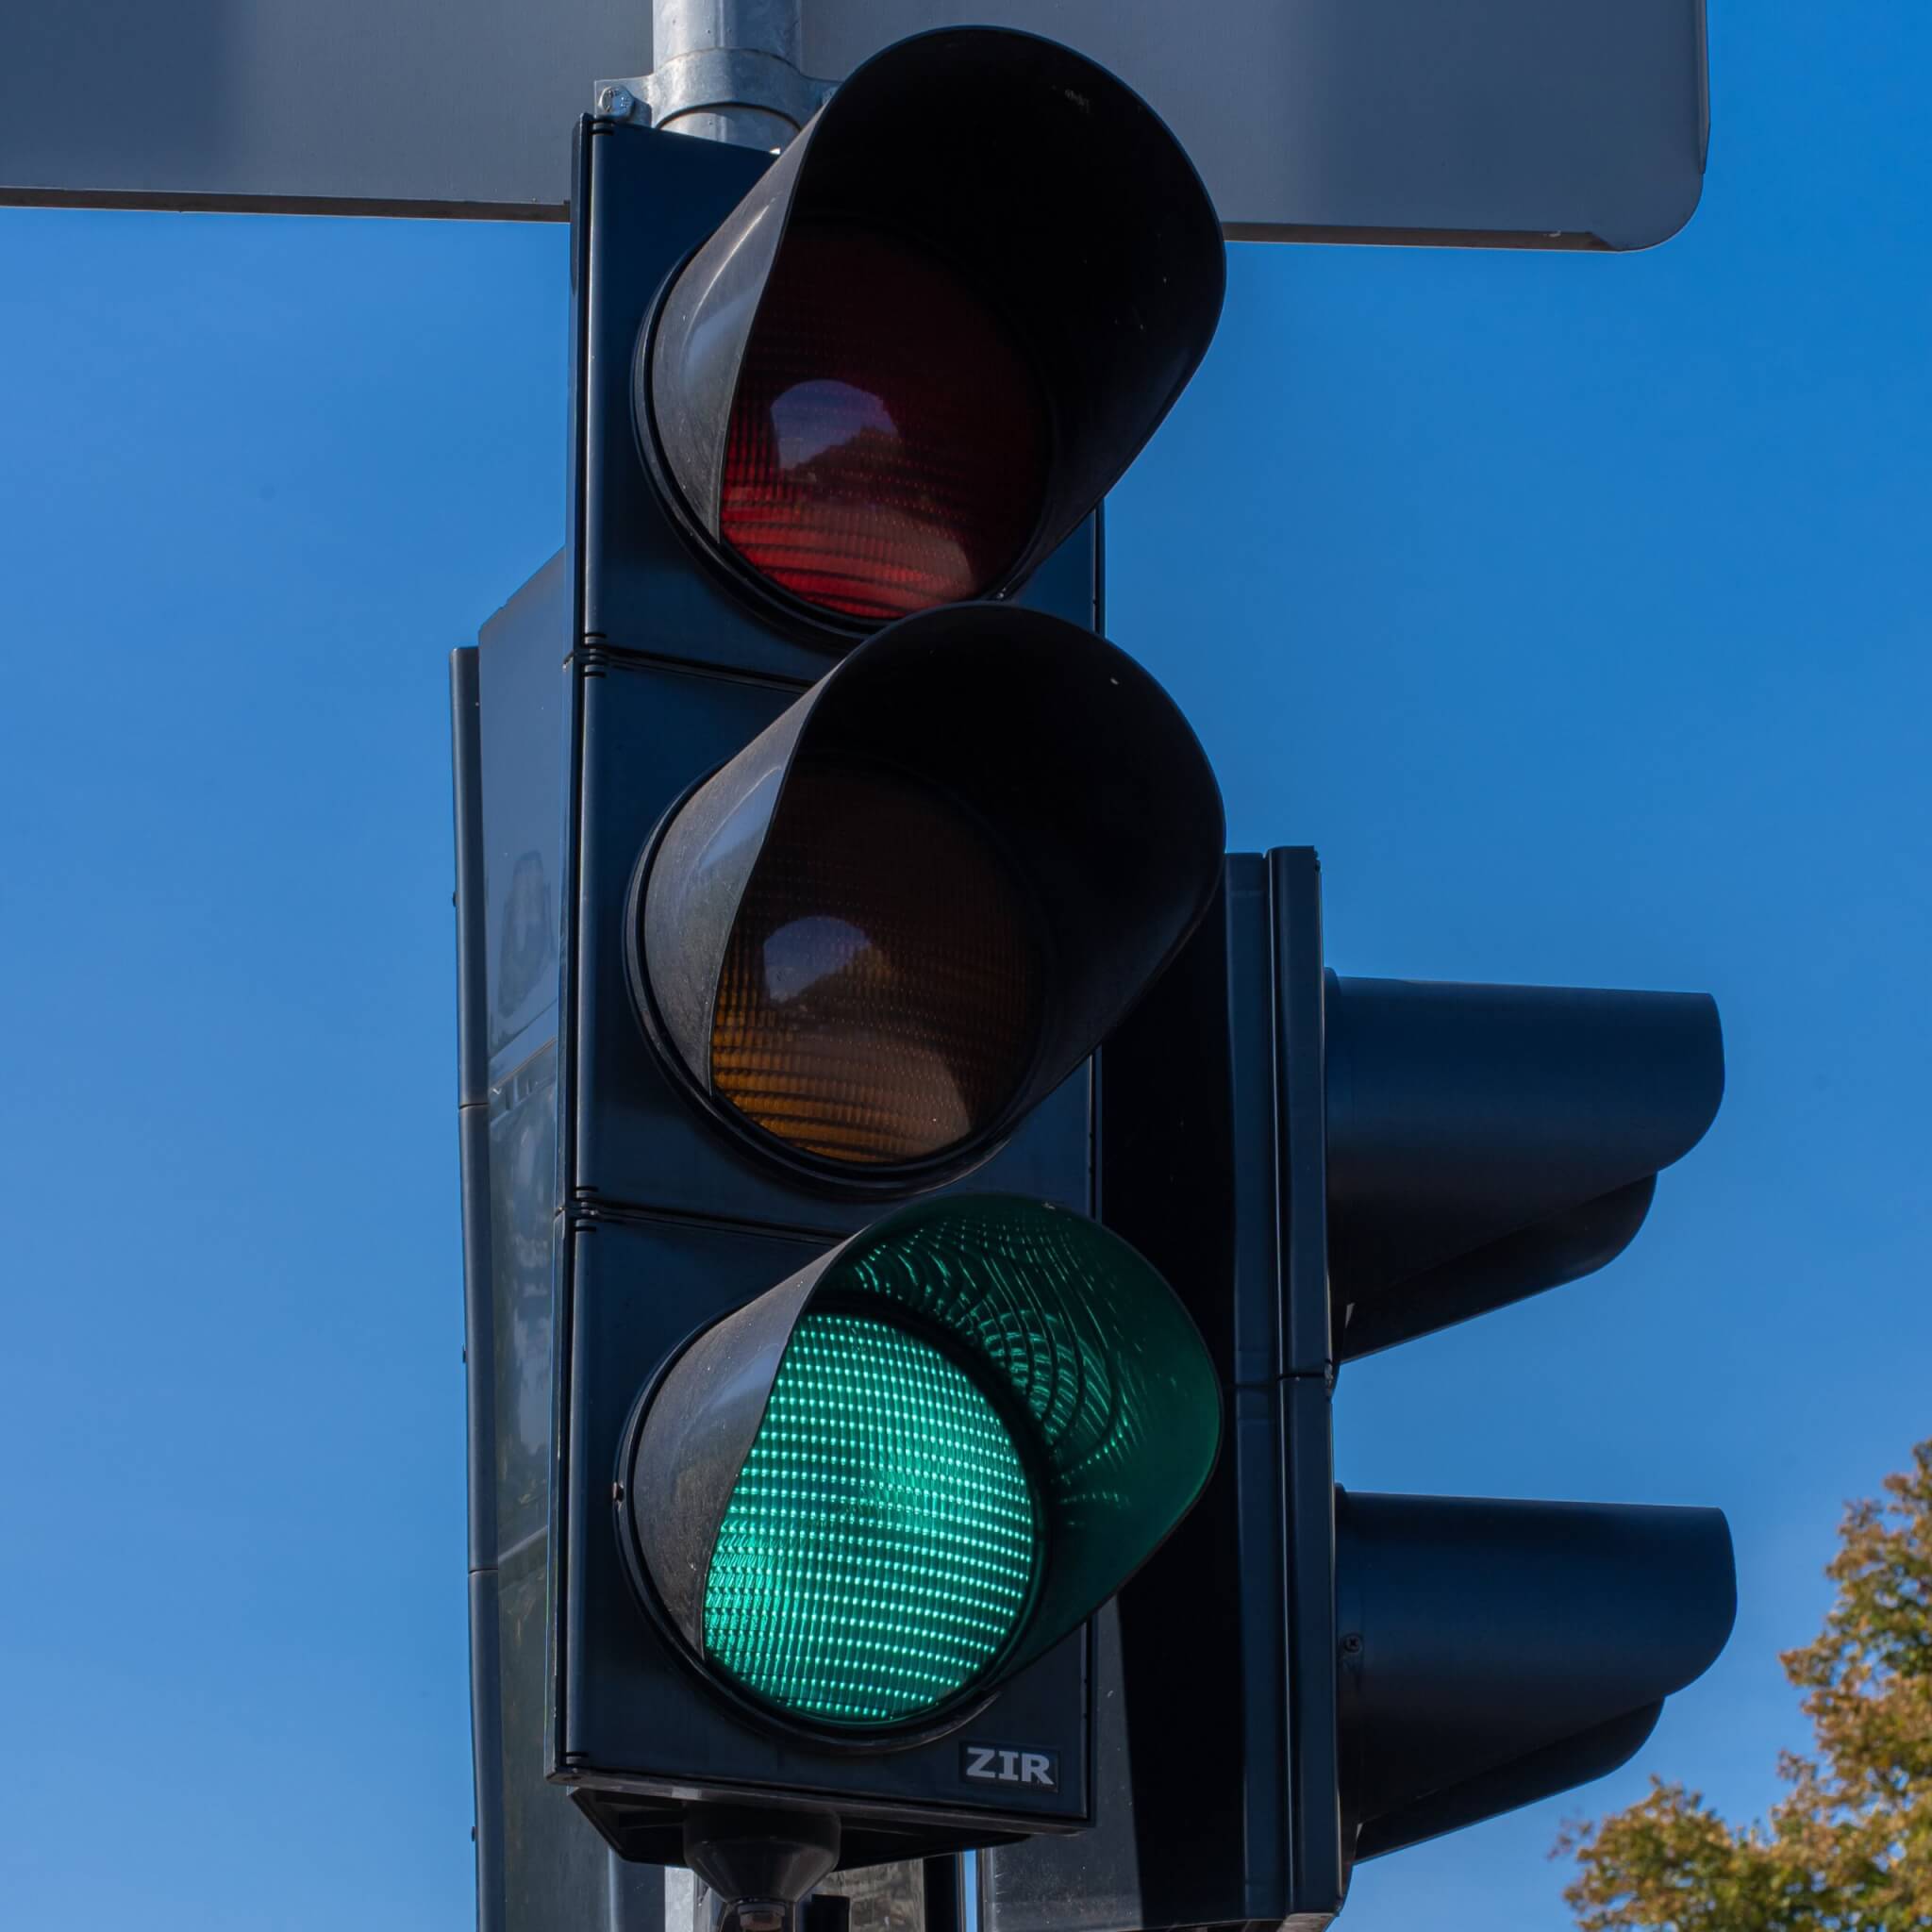 Traffic signal with green light lit up